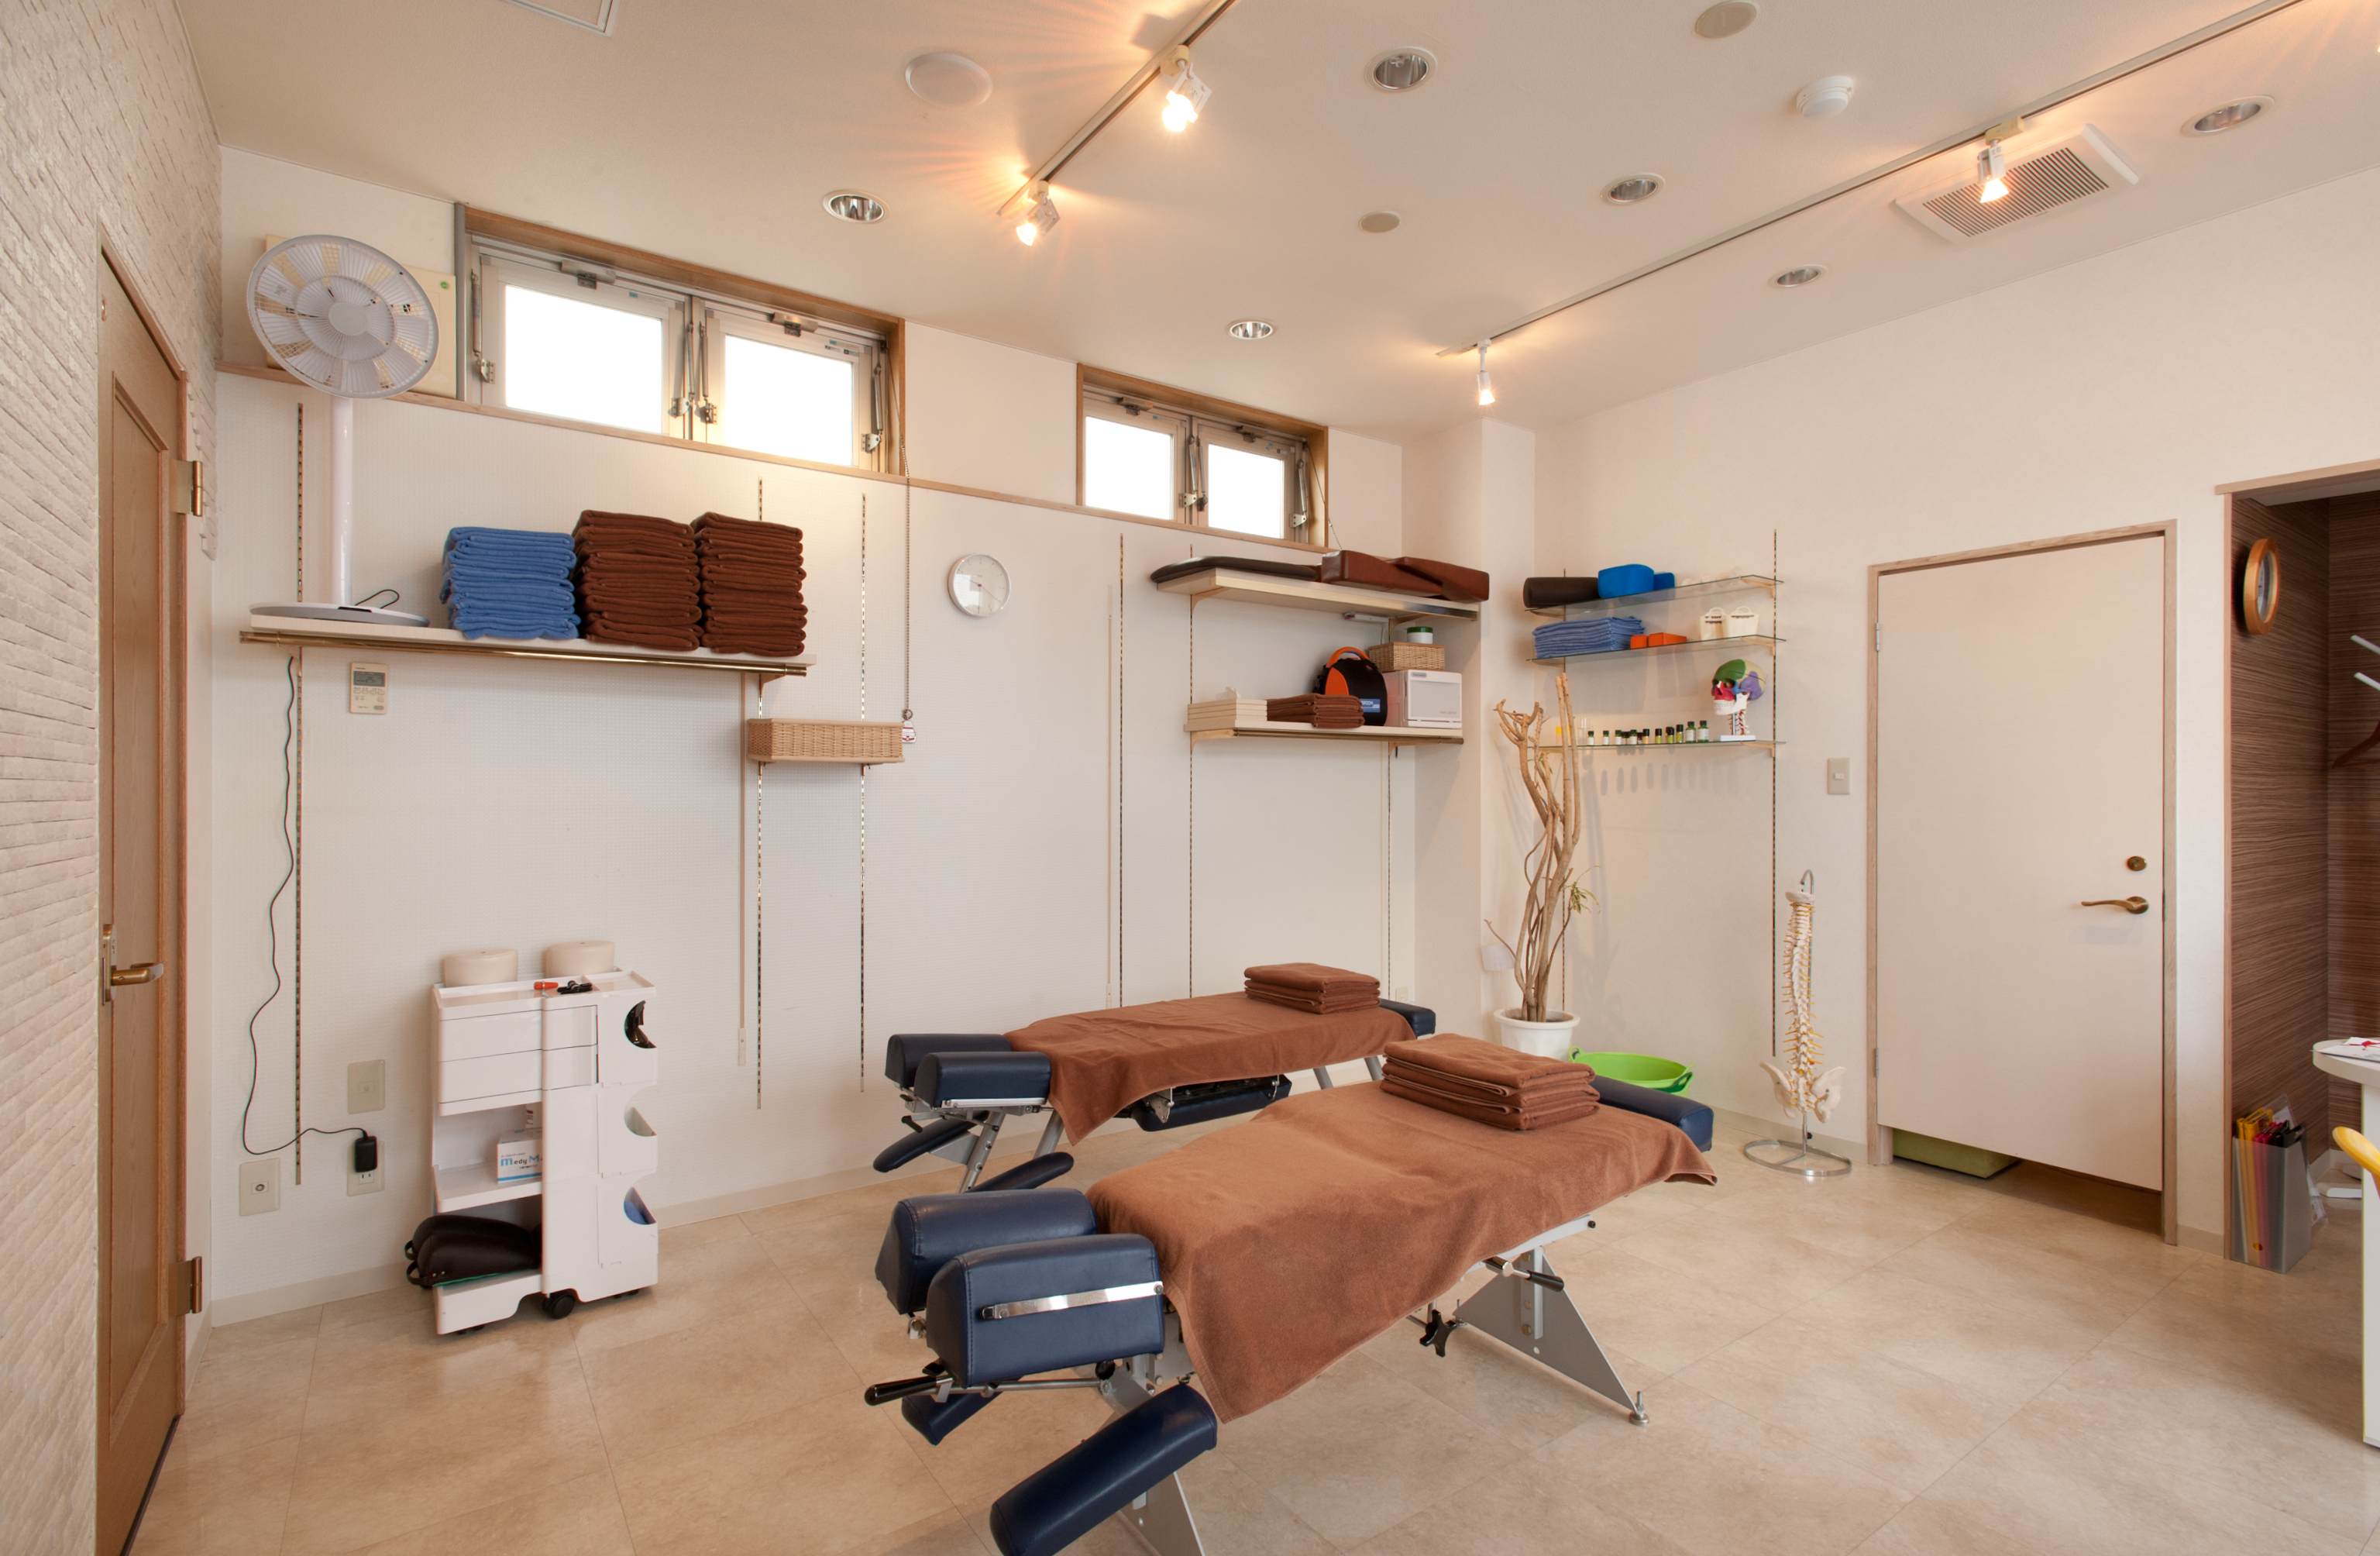 Welcome to Osteopathy